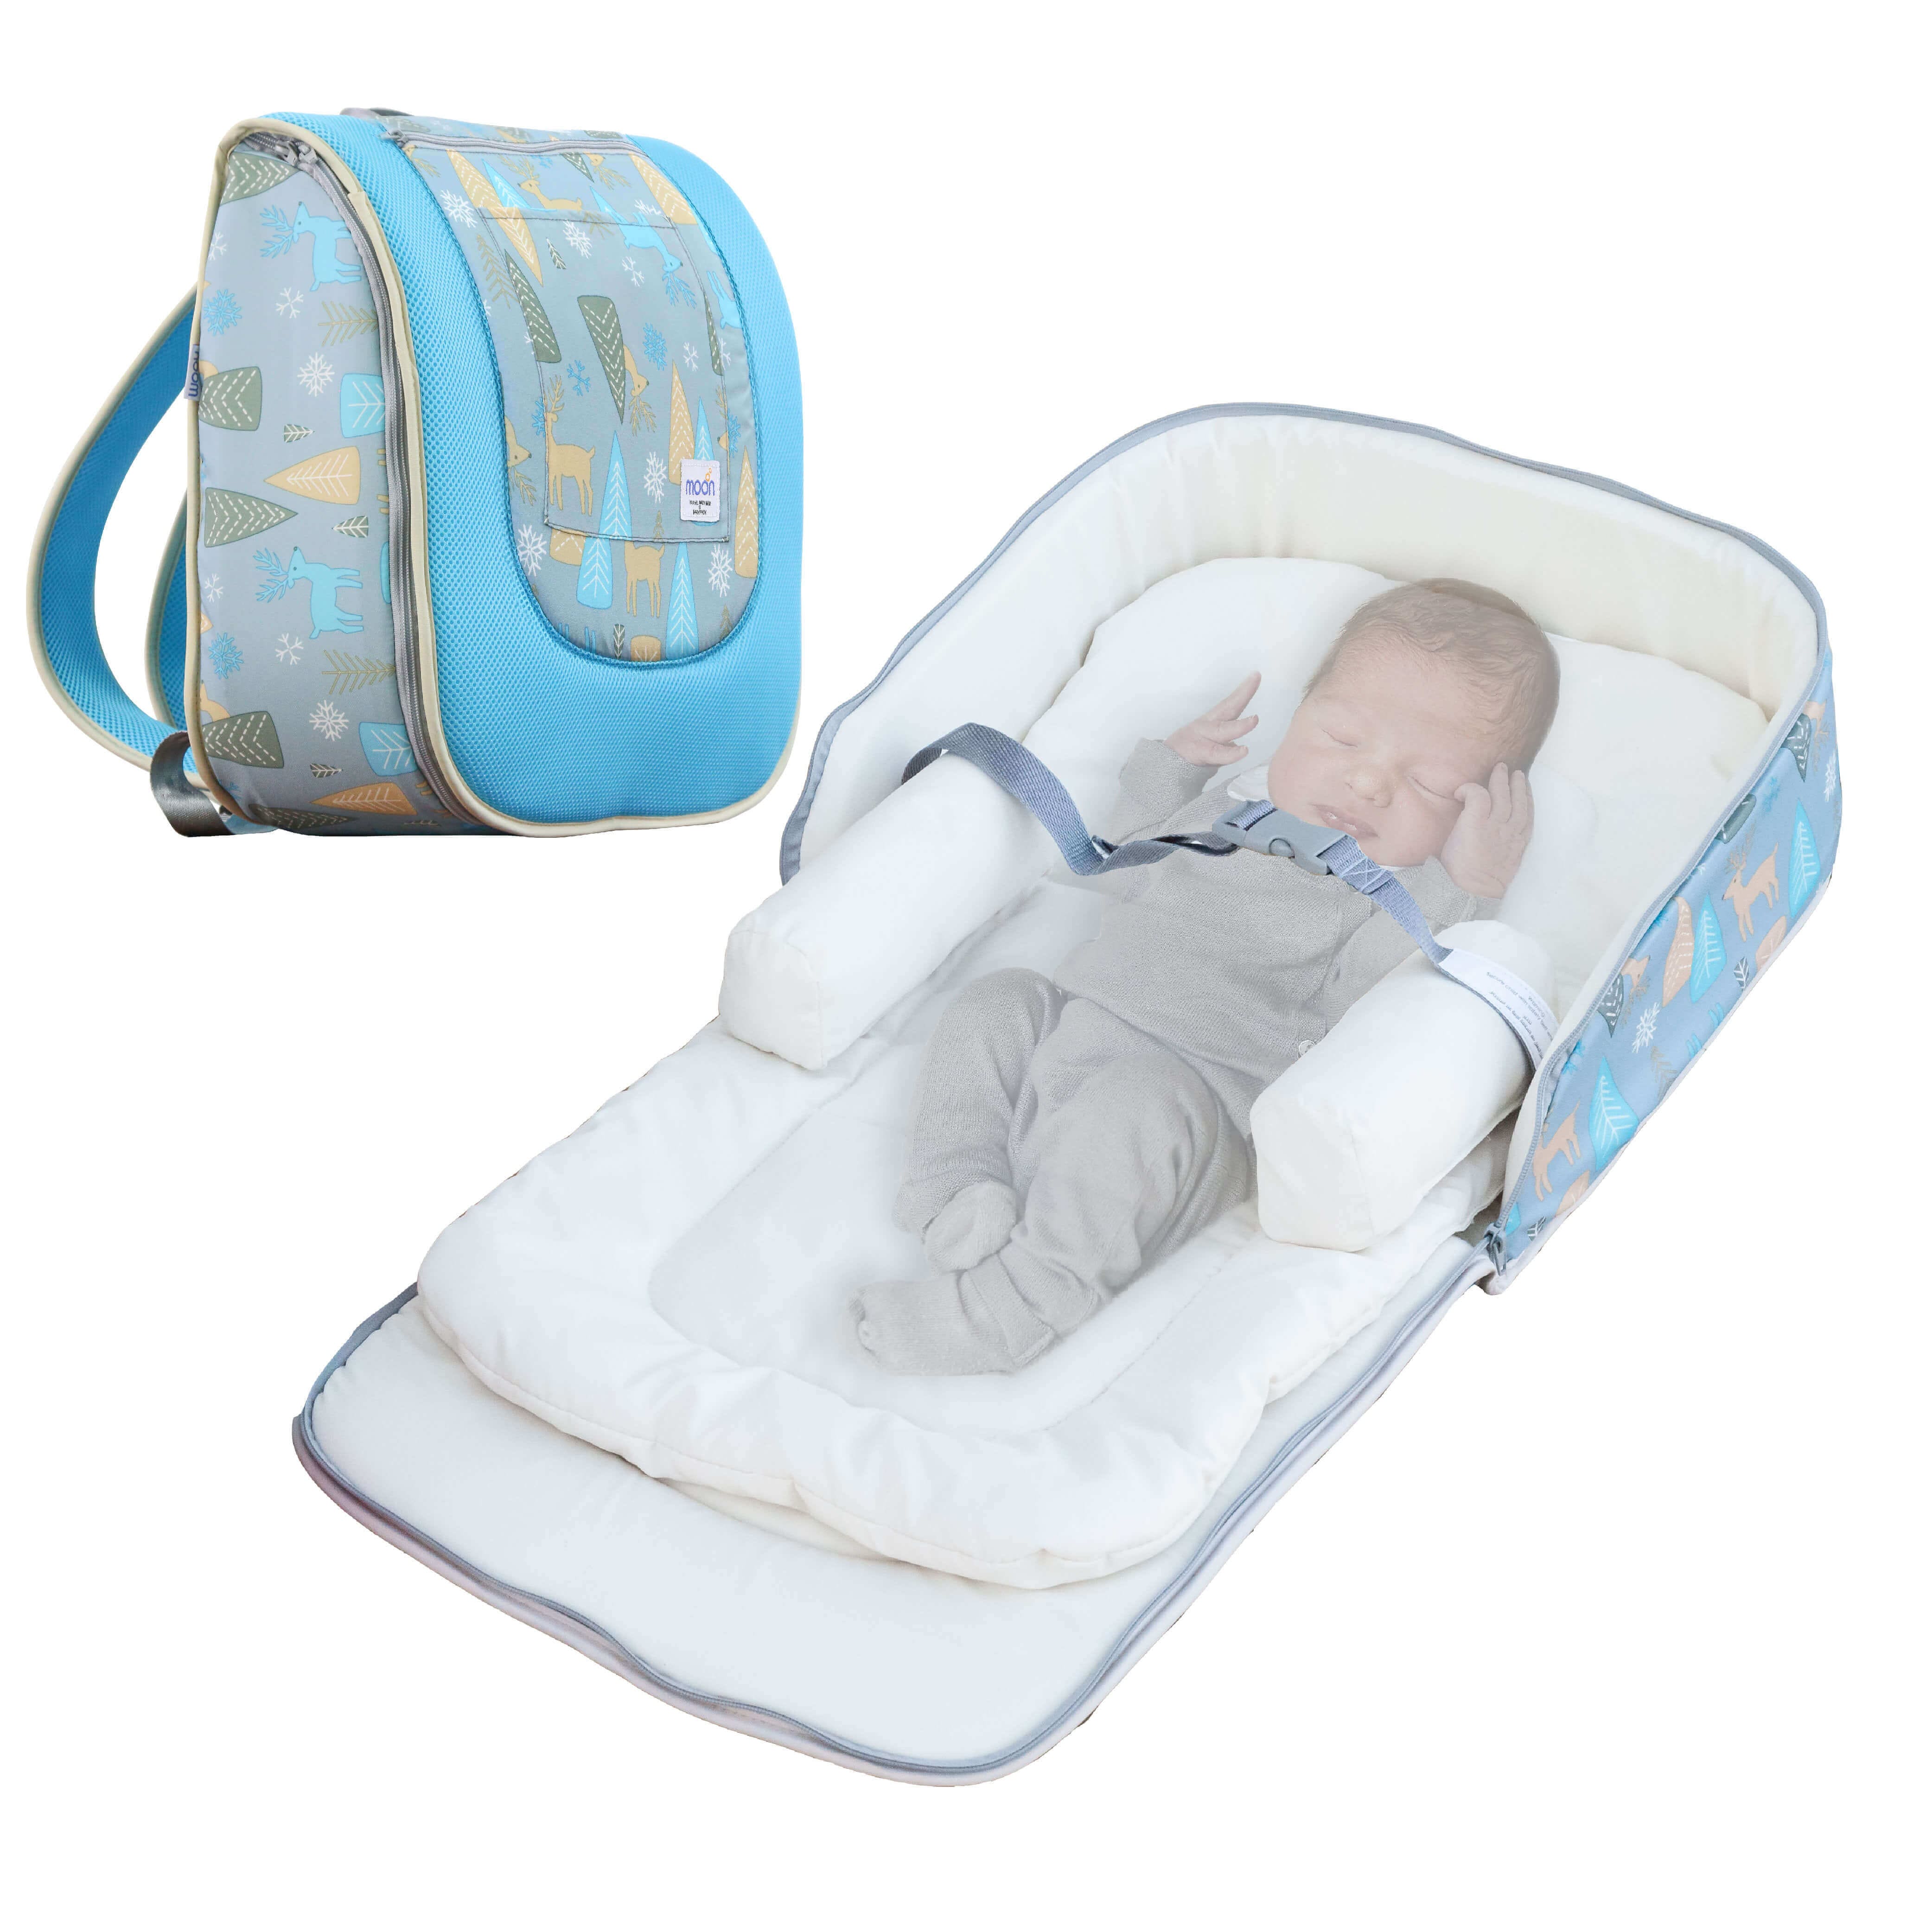 Moon Travalo Deer Print Portable Travel Baby Bed & Backpack Bag, Multicolour